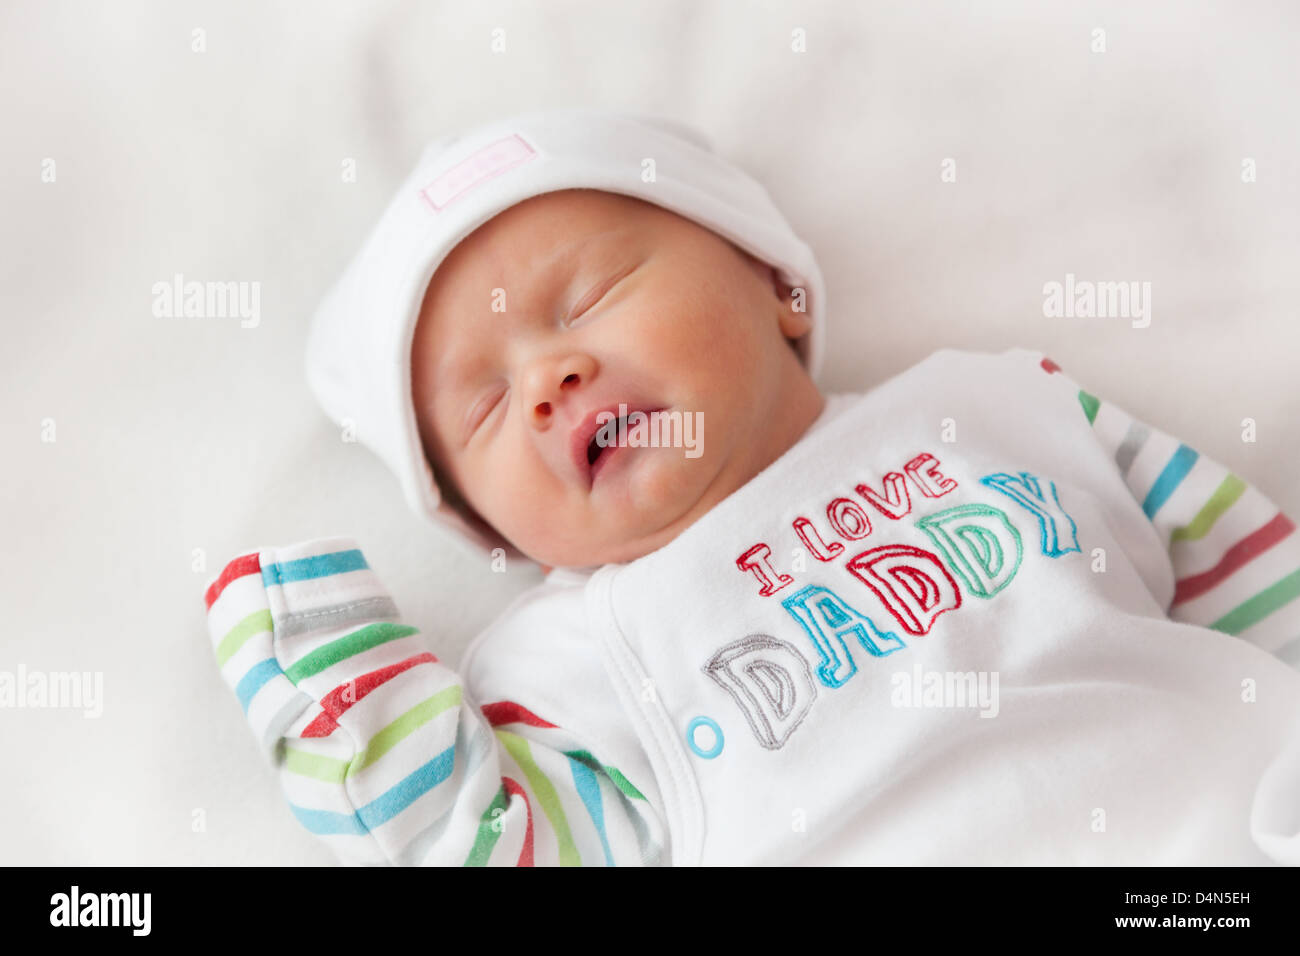 Sleeping baby girl (8 days old) taken in a very soft light (a light tent). Hat reads 'cute' and top reads 'I love Daddy'. Stock Photo